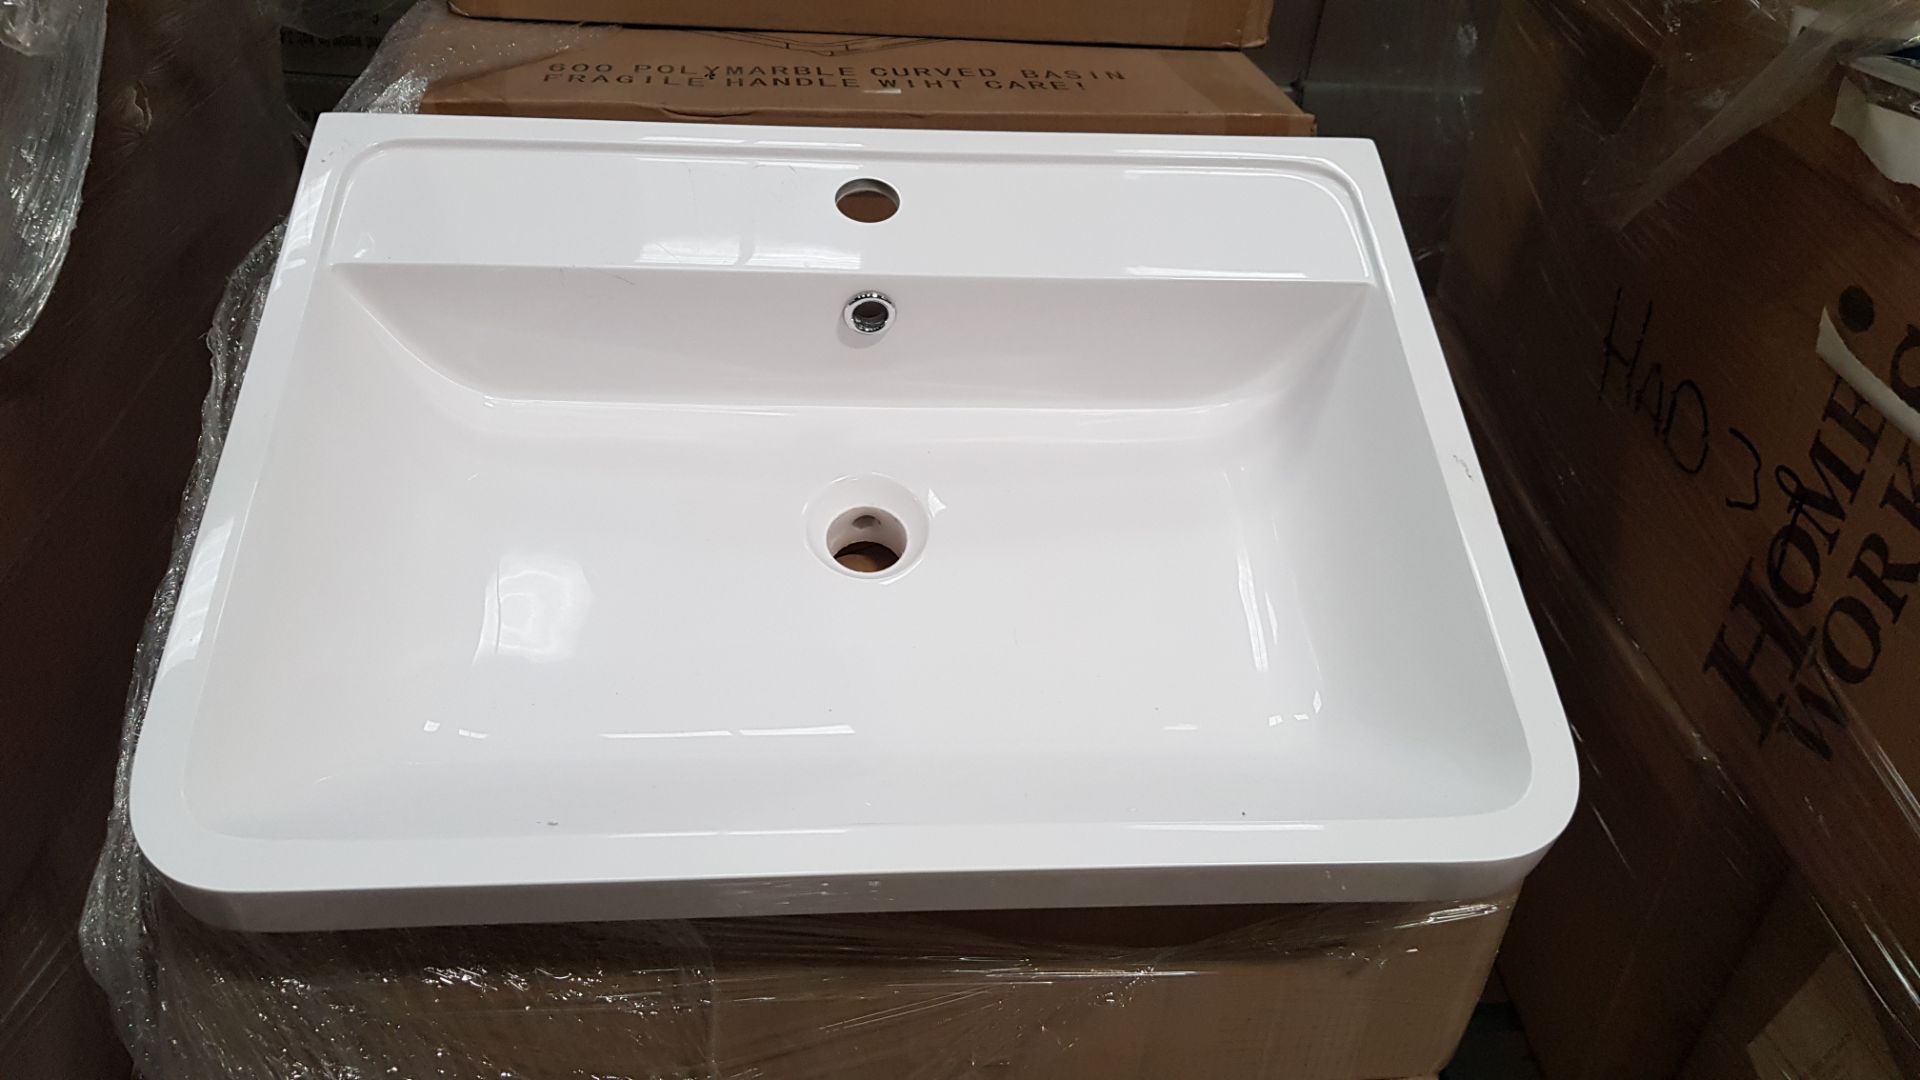 4 X BRAND NEW BOXED 600 POLYMARBLE CURVED BASIN SINK - IN 3 BOXES AND 1 SAMPLE (HAS MARKS)